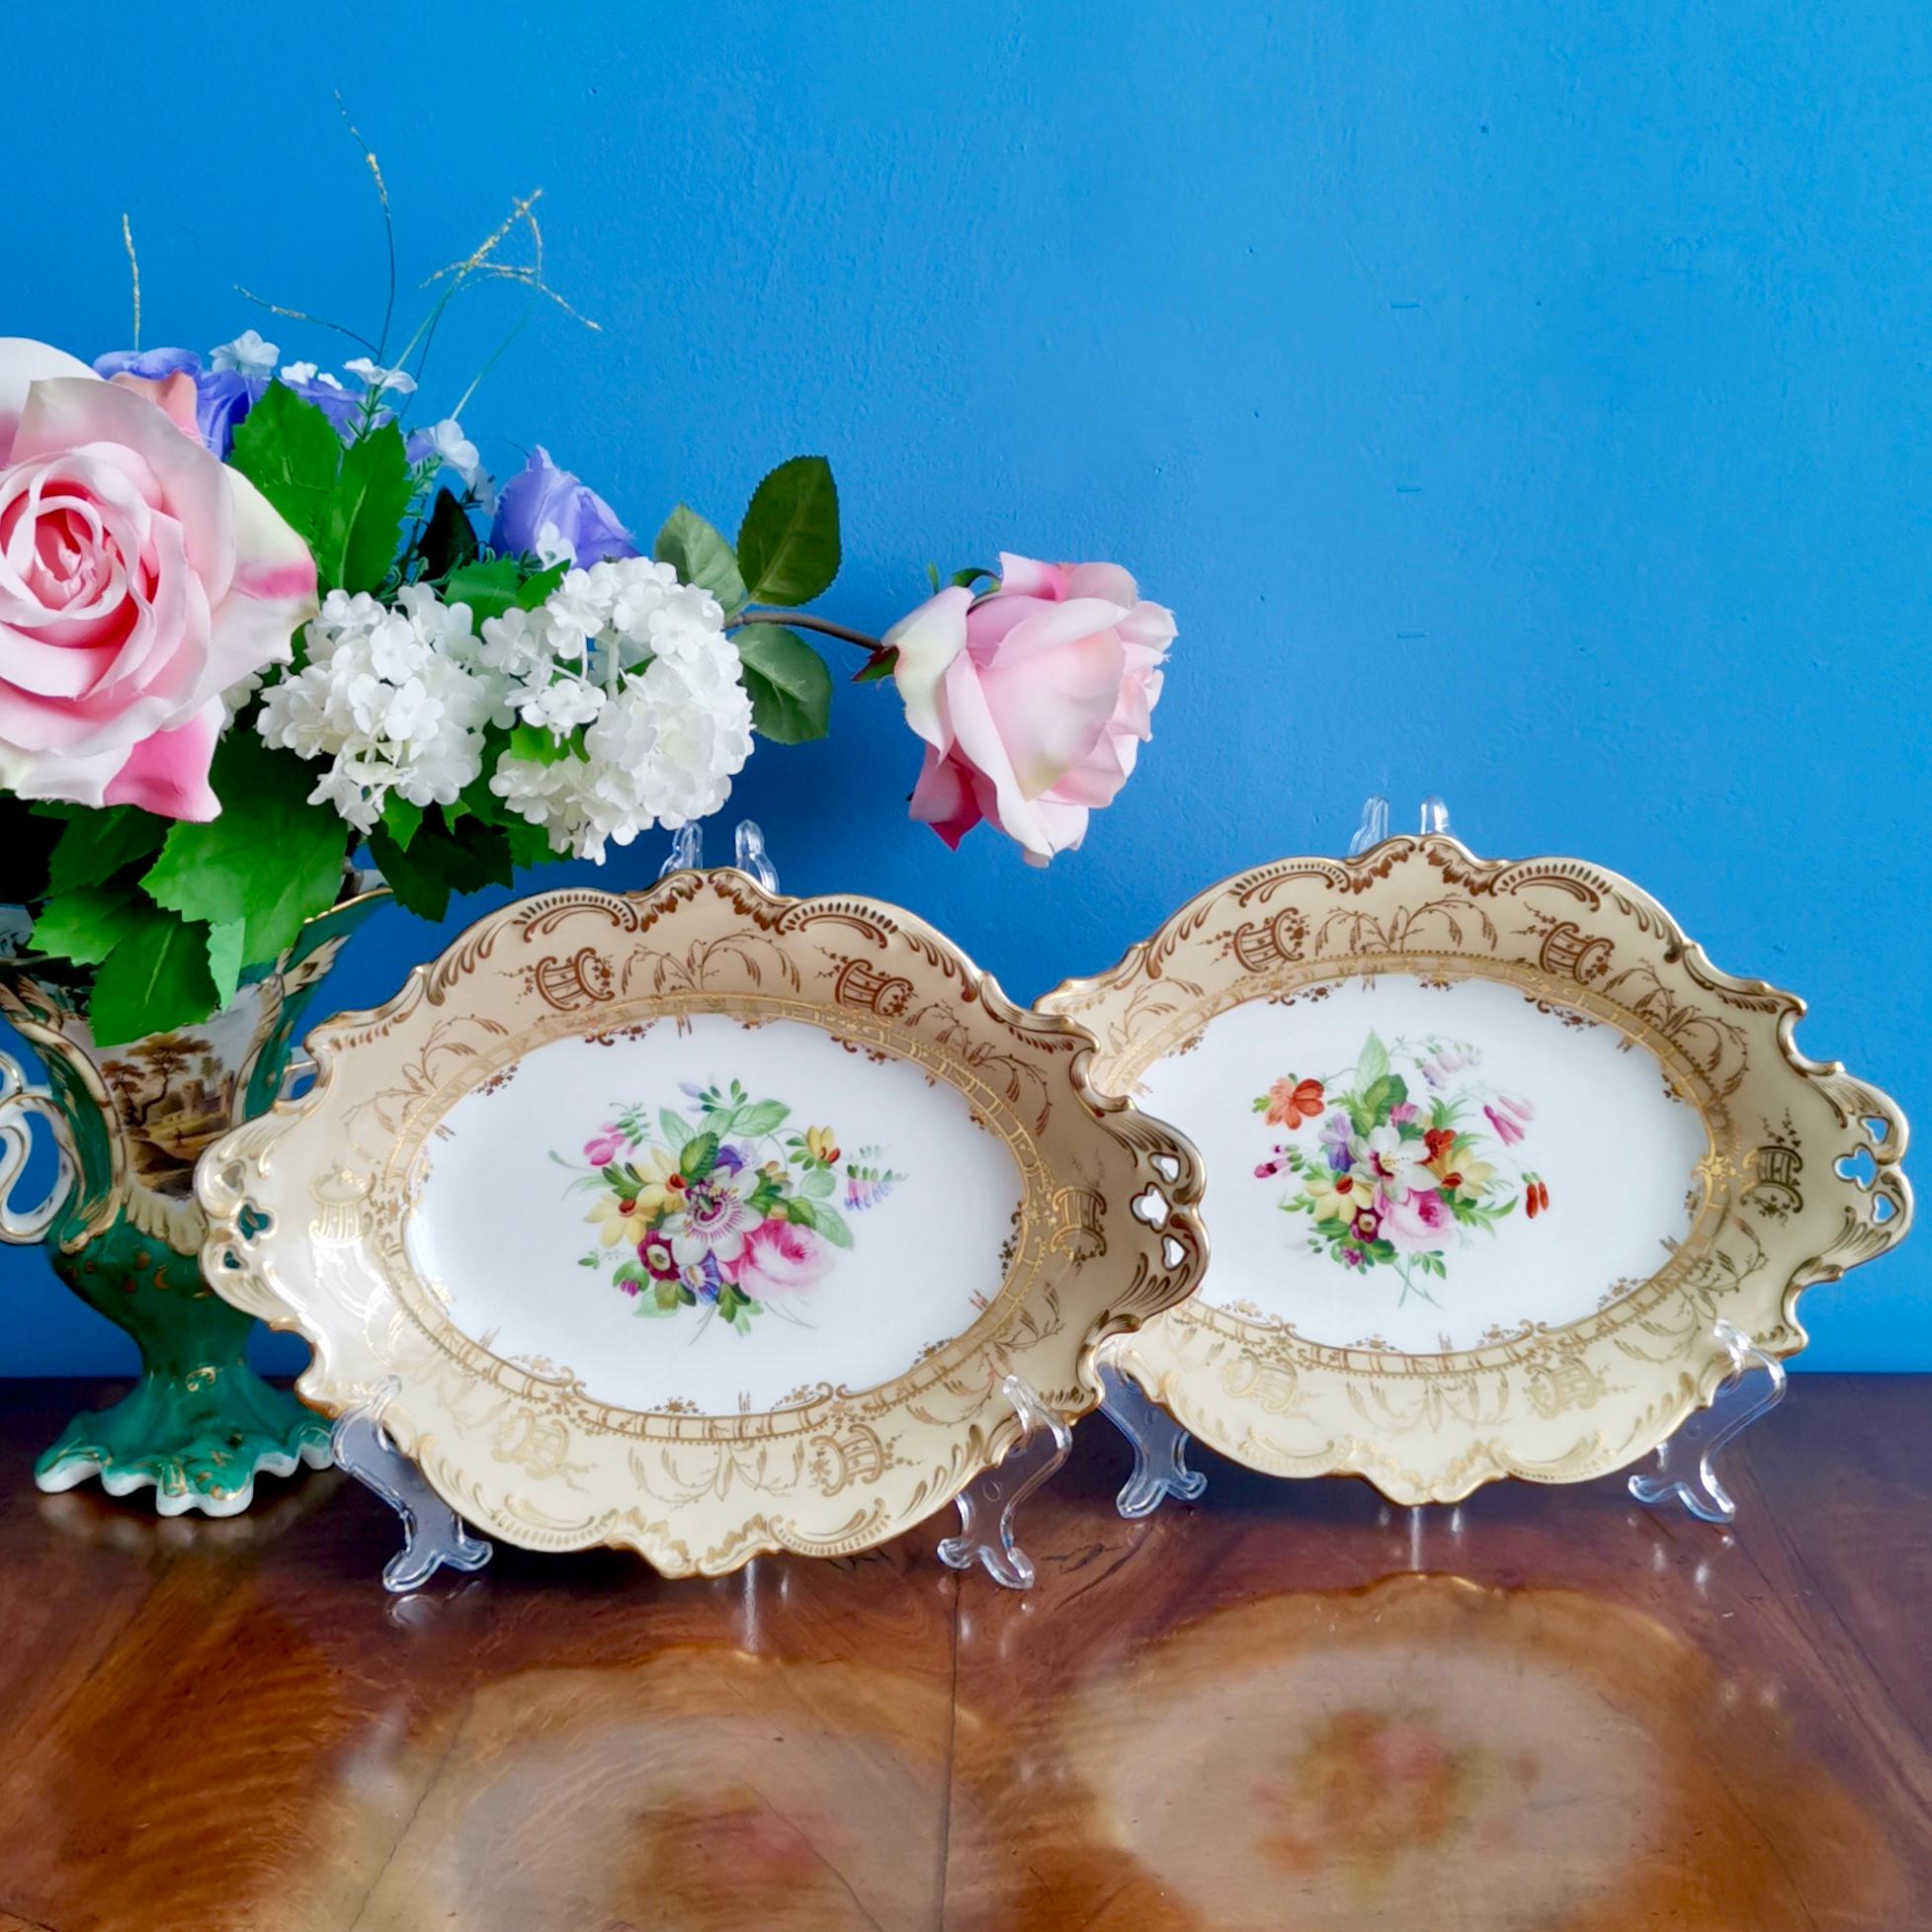 This is a set of two beautiful oval dessert serving dishes made by Coalport in about 1847 and painted by the famous porcelain painter Thomas Dixon. These dishes would have belonged to a large dessert service. I have several other dessert items from